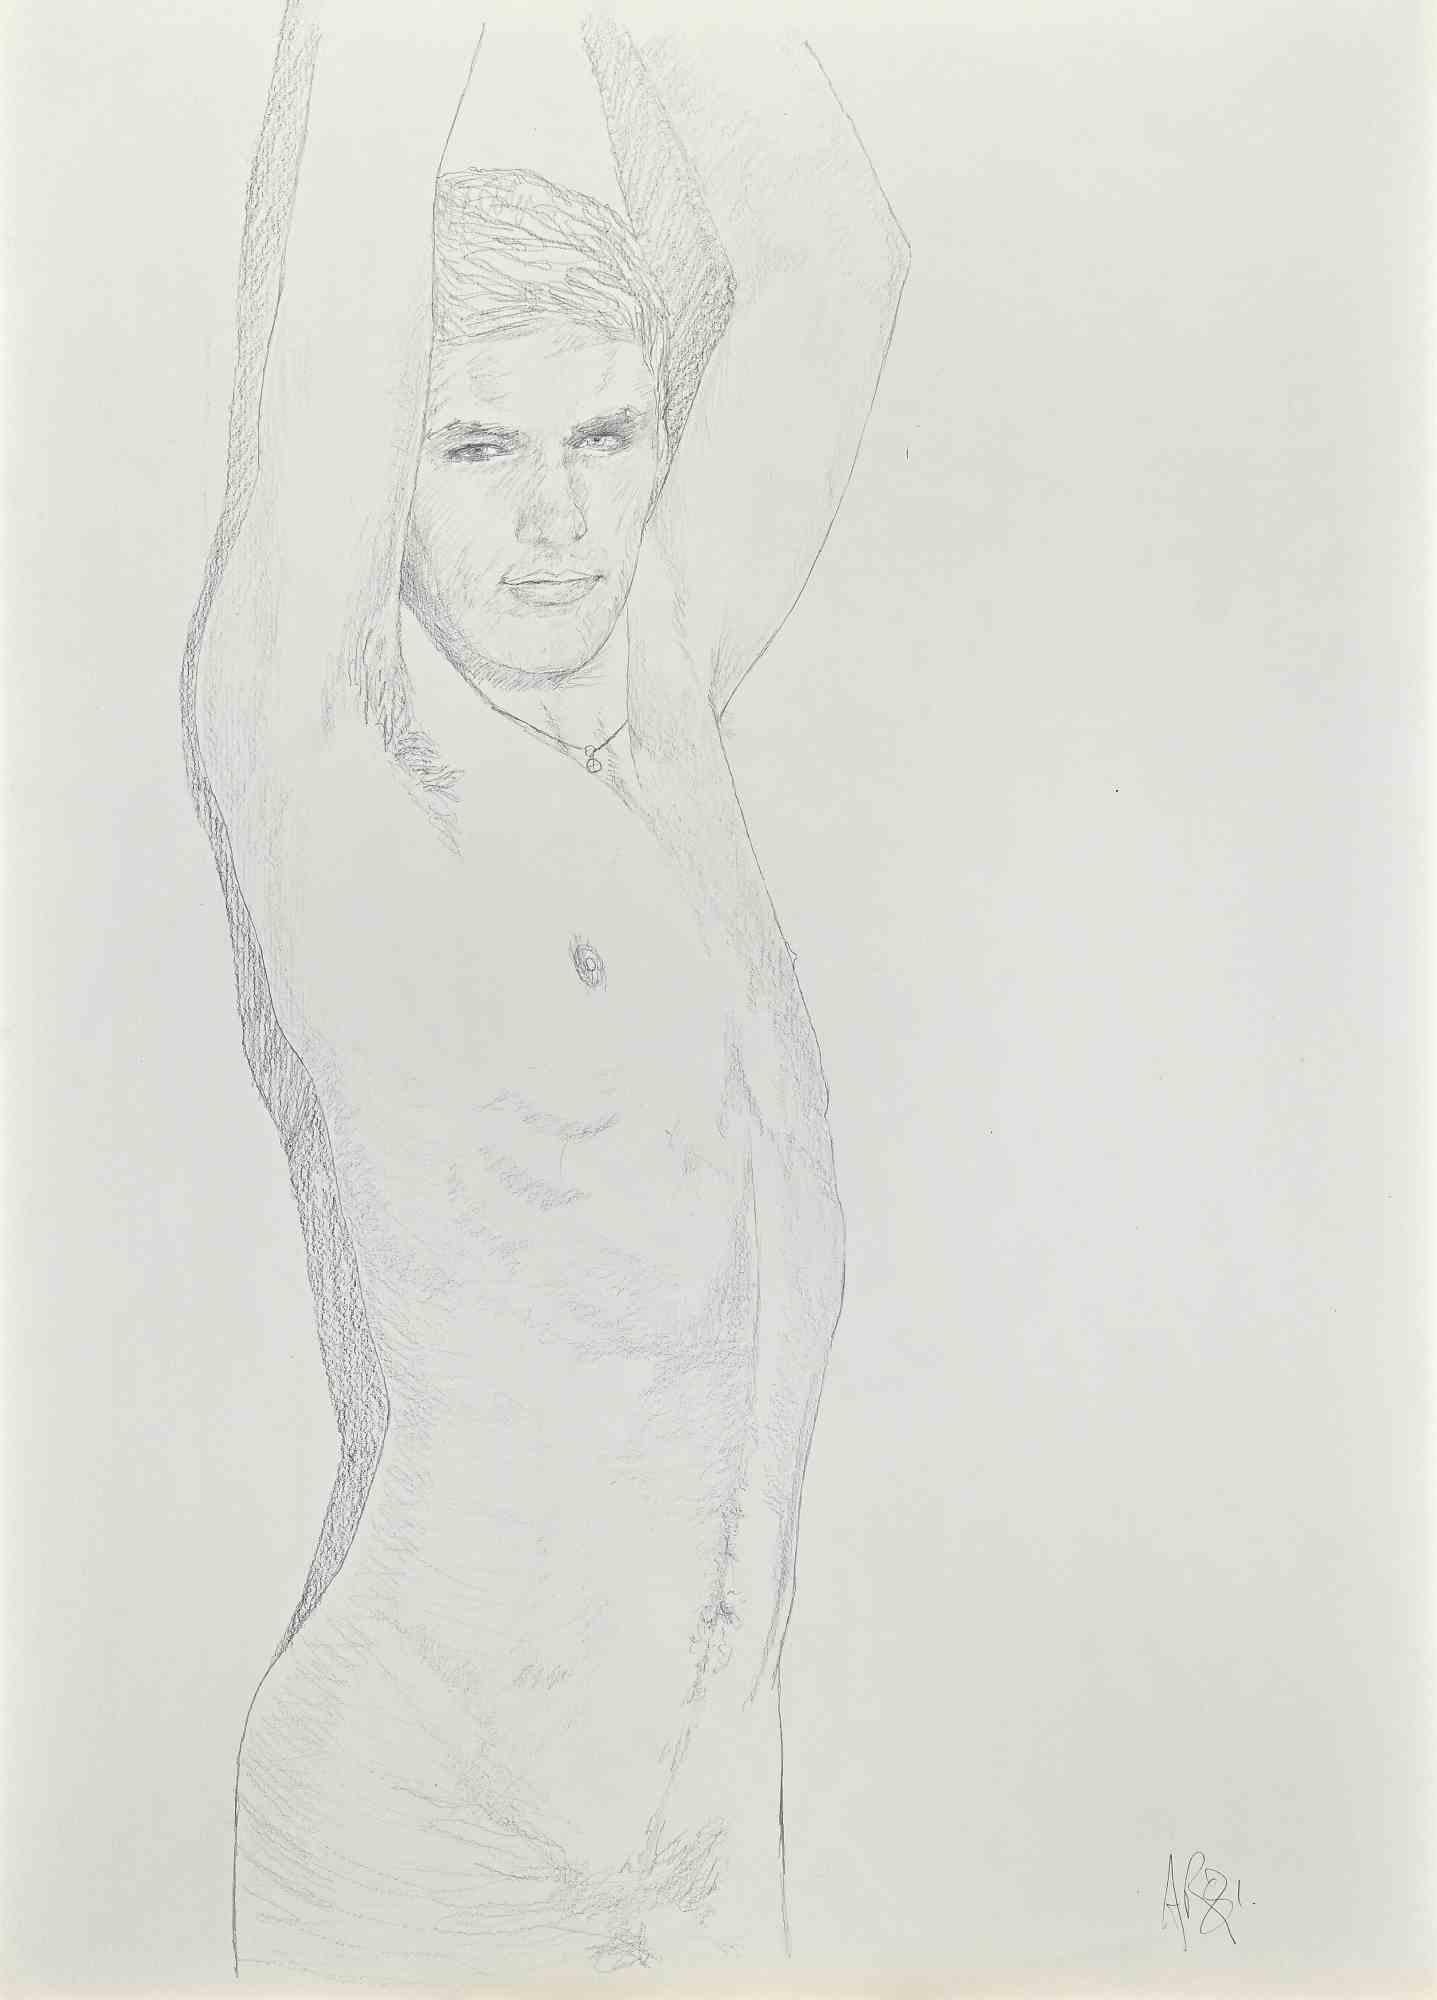 Boy Nude is an Original Pencil Drawing realized by Anthony Roaland in 1981.

Good condition on a white cardboard, one margin with tear type notepad.

Monogrammed by the artist on the lower right corner.